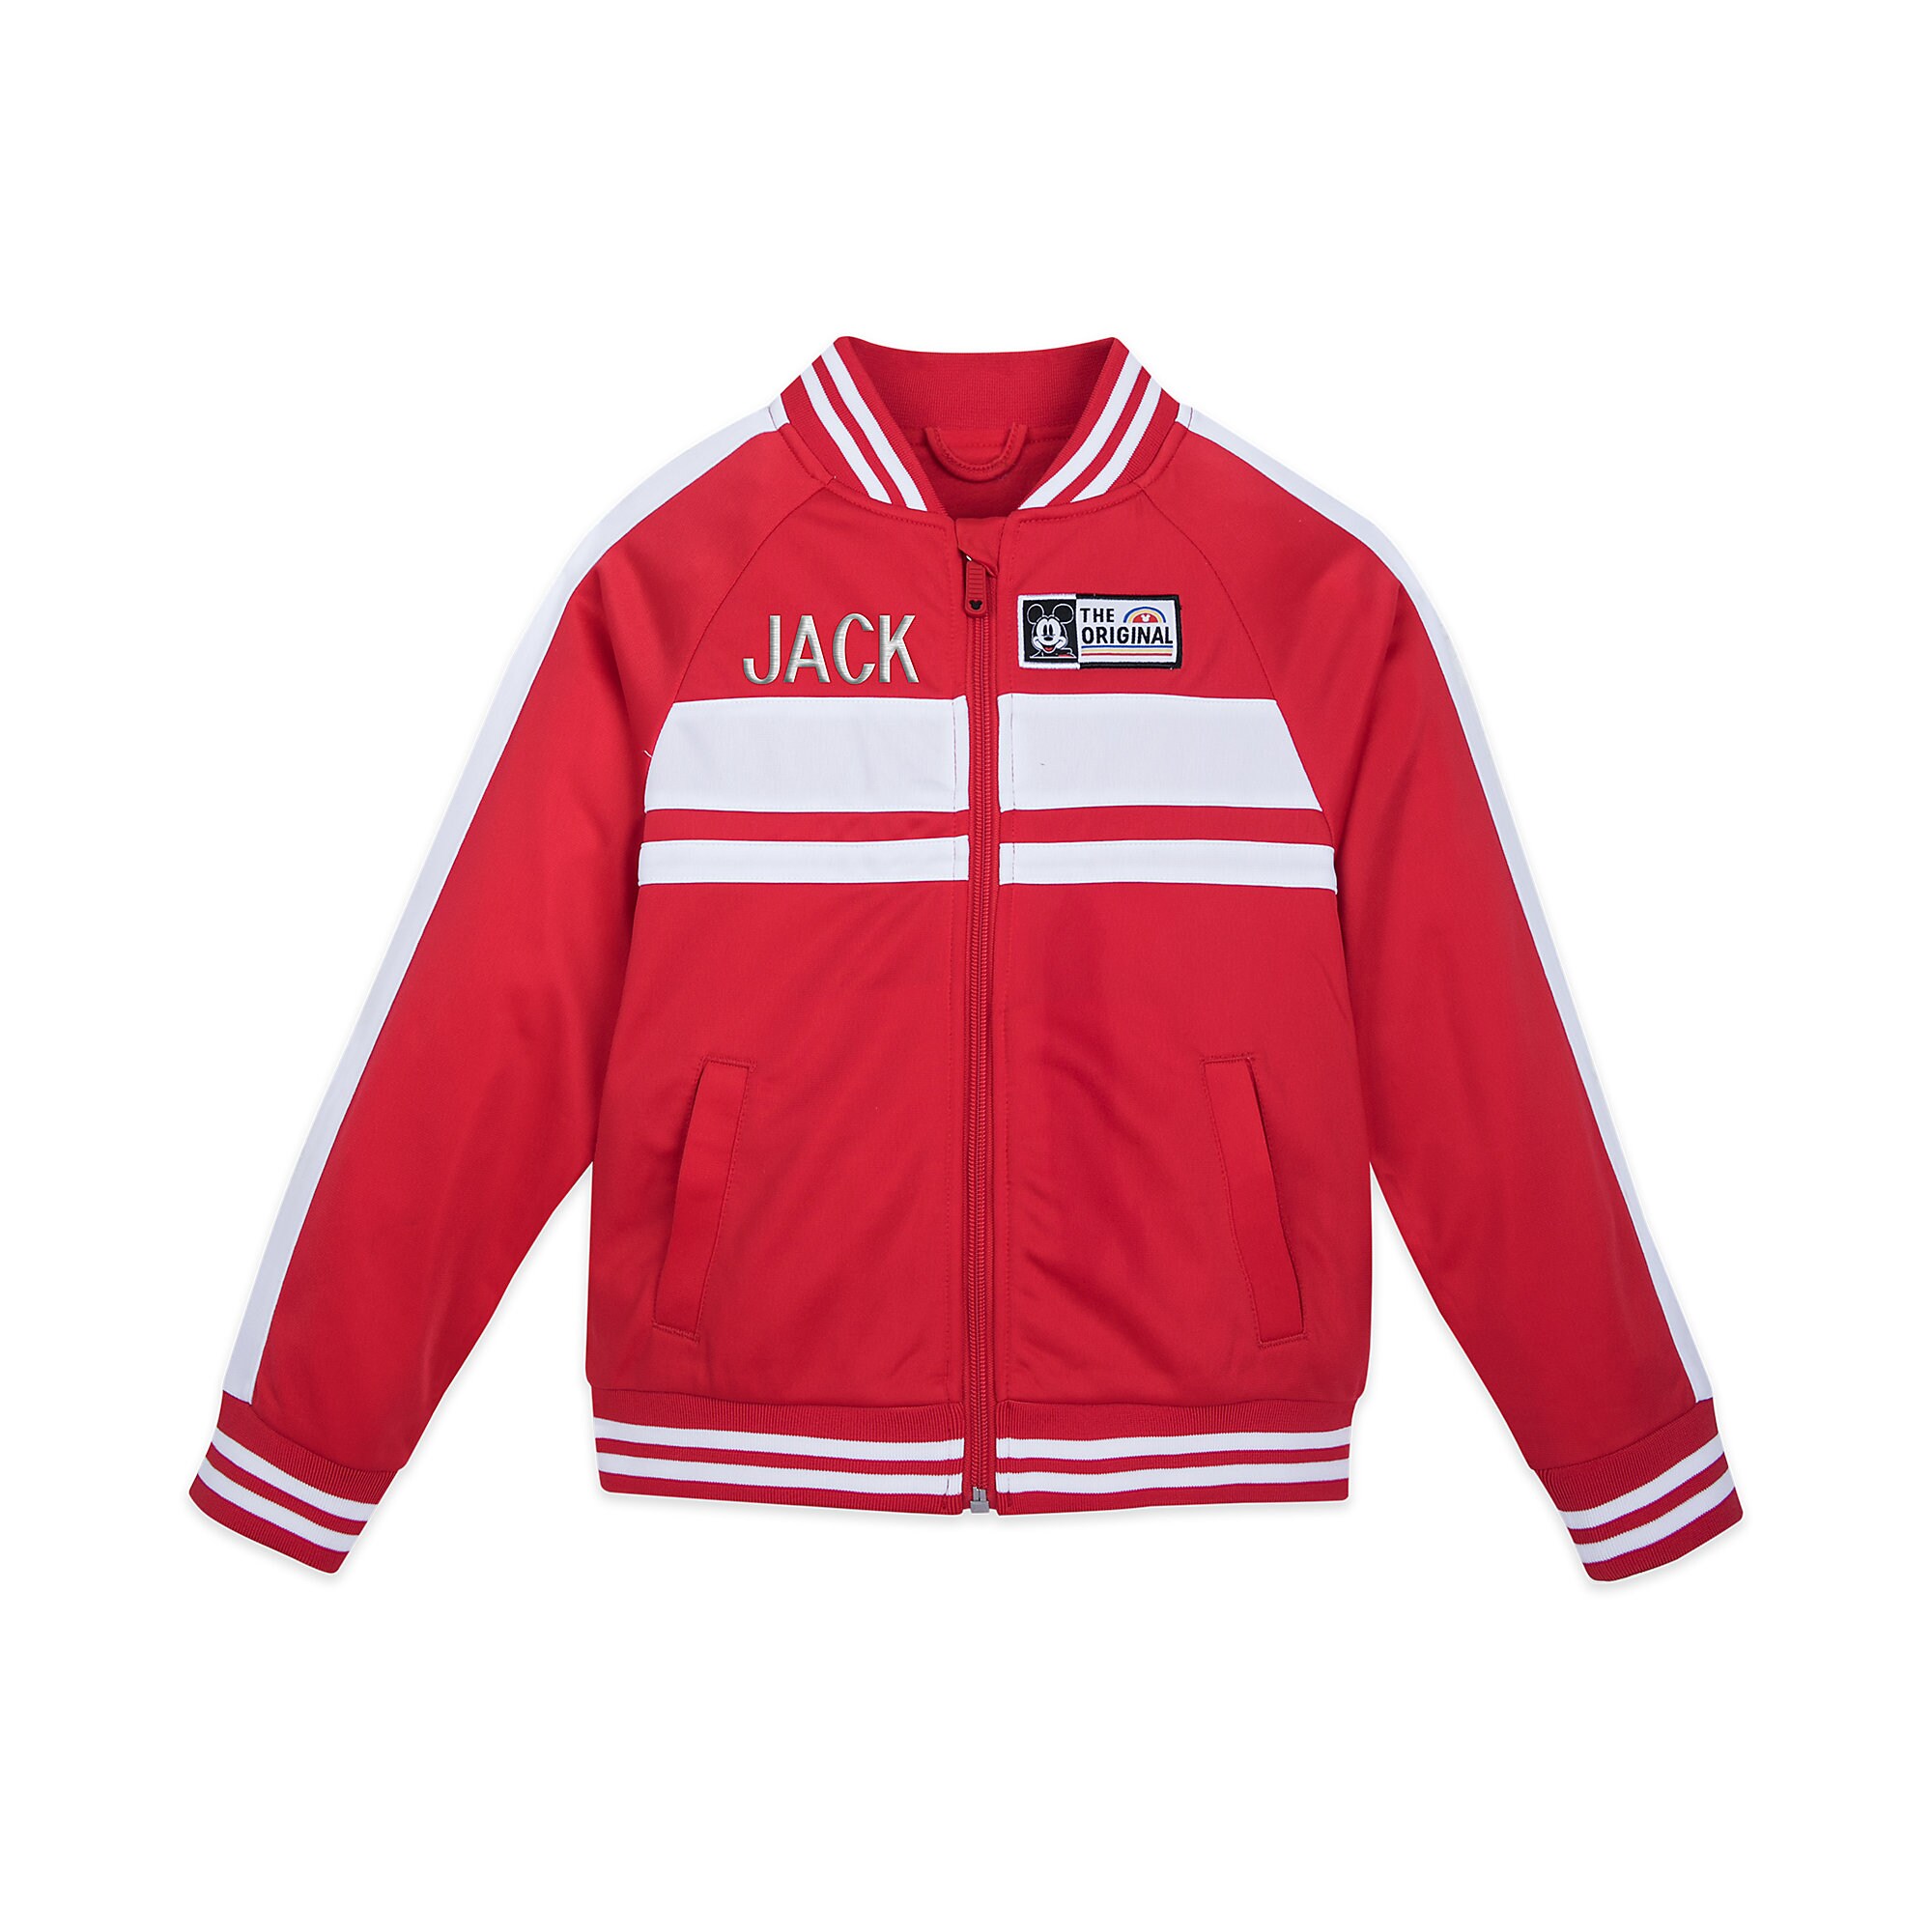 Mickey Mouse Track Jacket for Kids - Personalized now available online ...